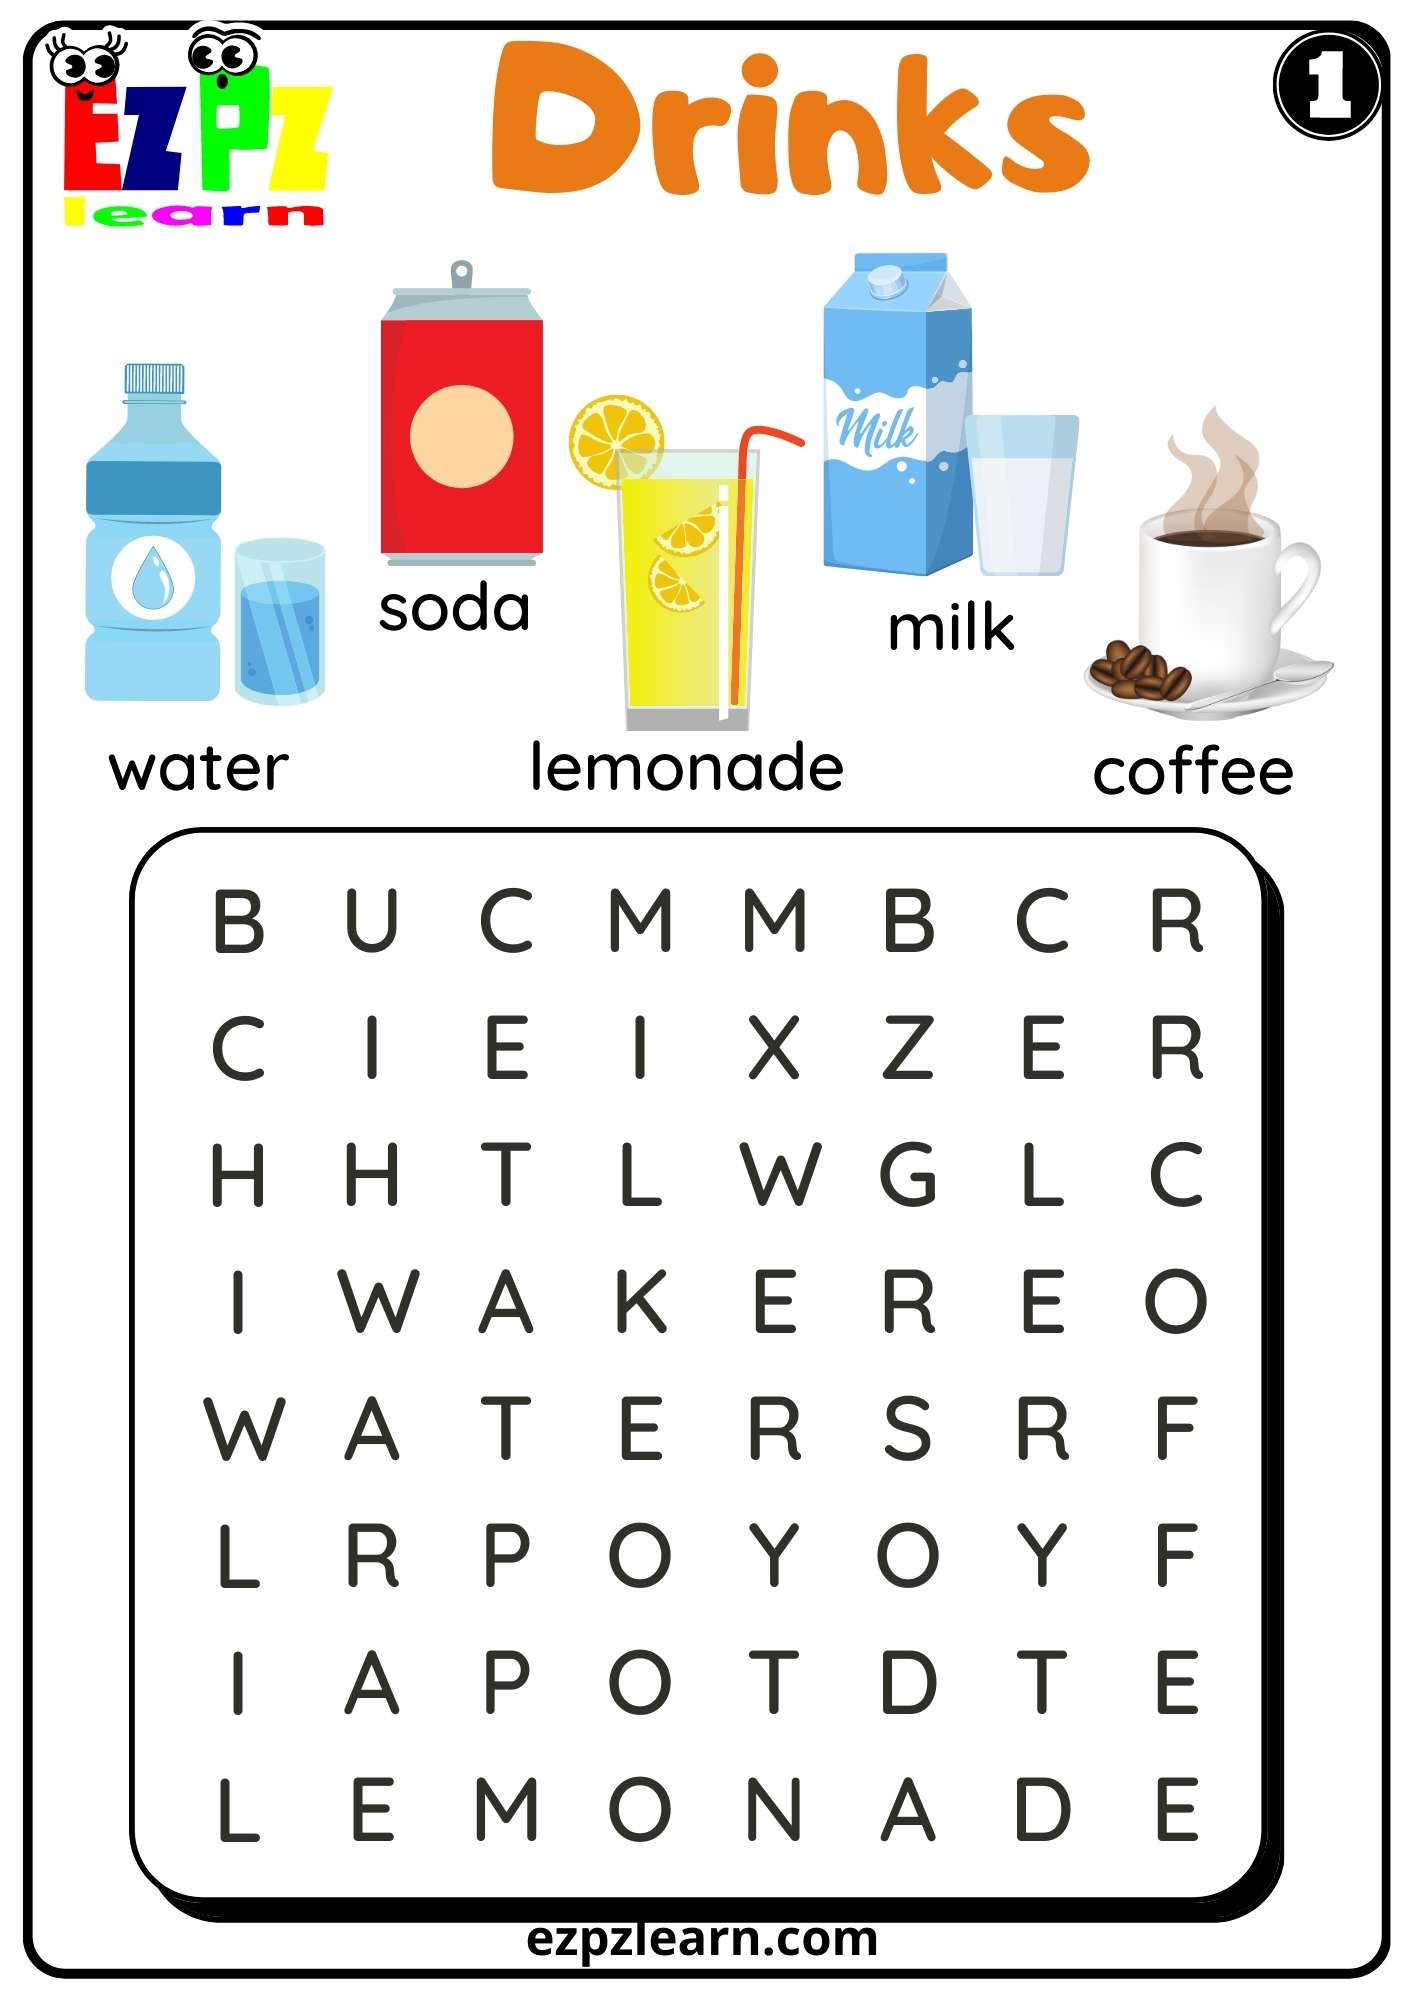 Food and Drinks ESL Word Search Puzzle Worksheets